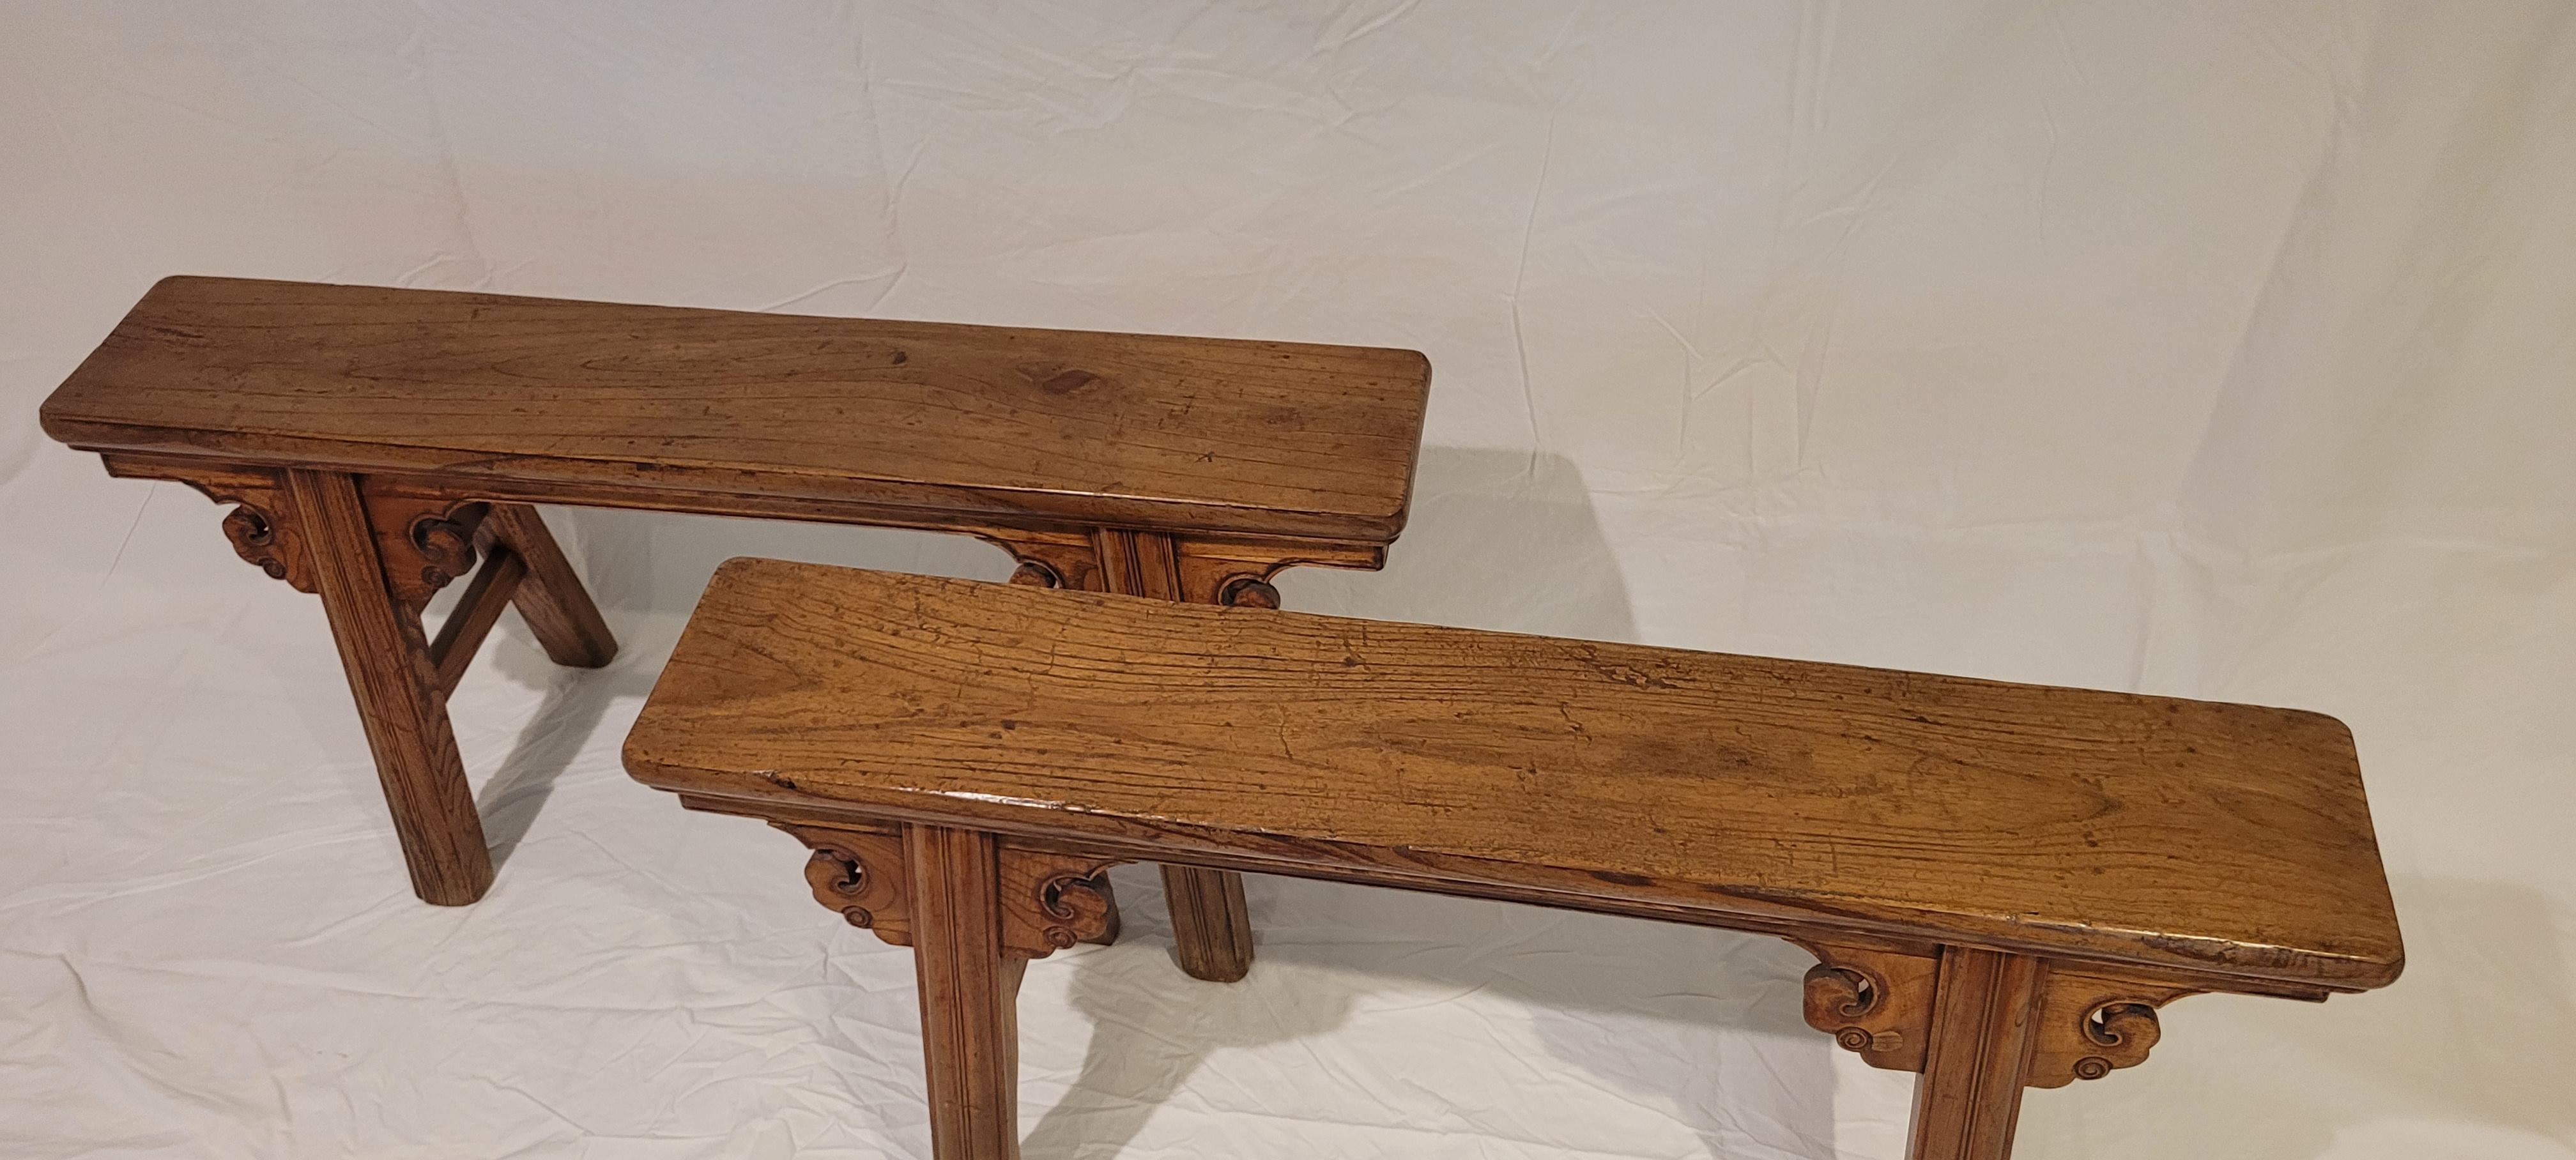 Spring Benches (Pair)	20h x 41w x 13d (lowest part of the legs)
The top of the pair is a solid plank of wood.  The legs are beaded in the style of “incense stick” and are jointed to the top panel by using unmitered tenoned joints. The spandrels are